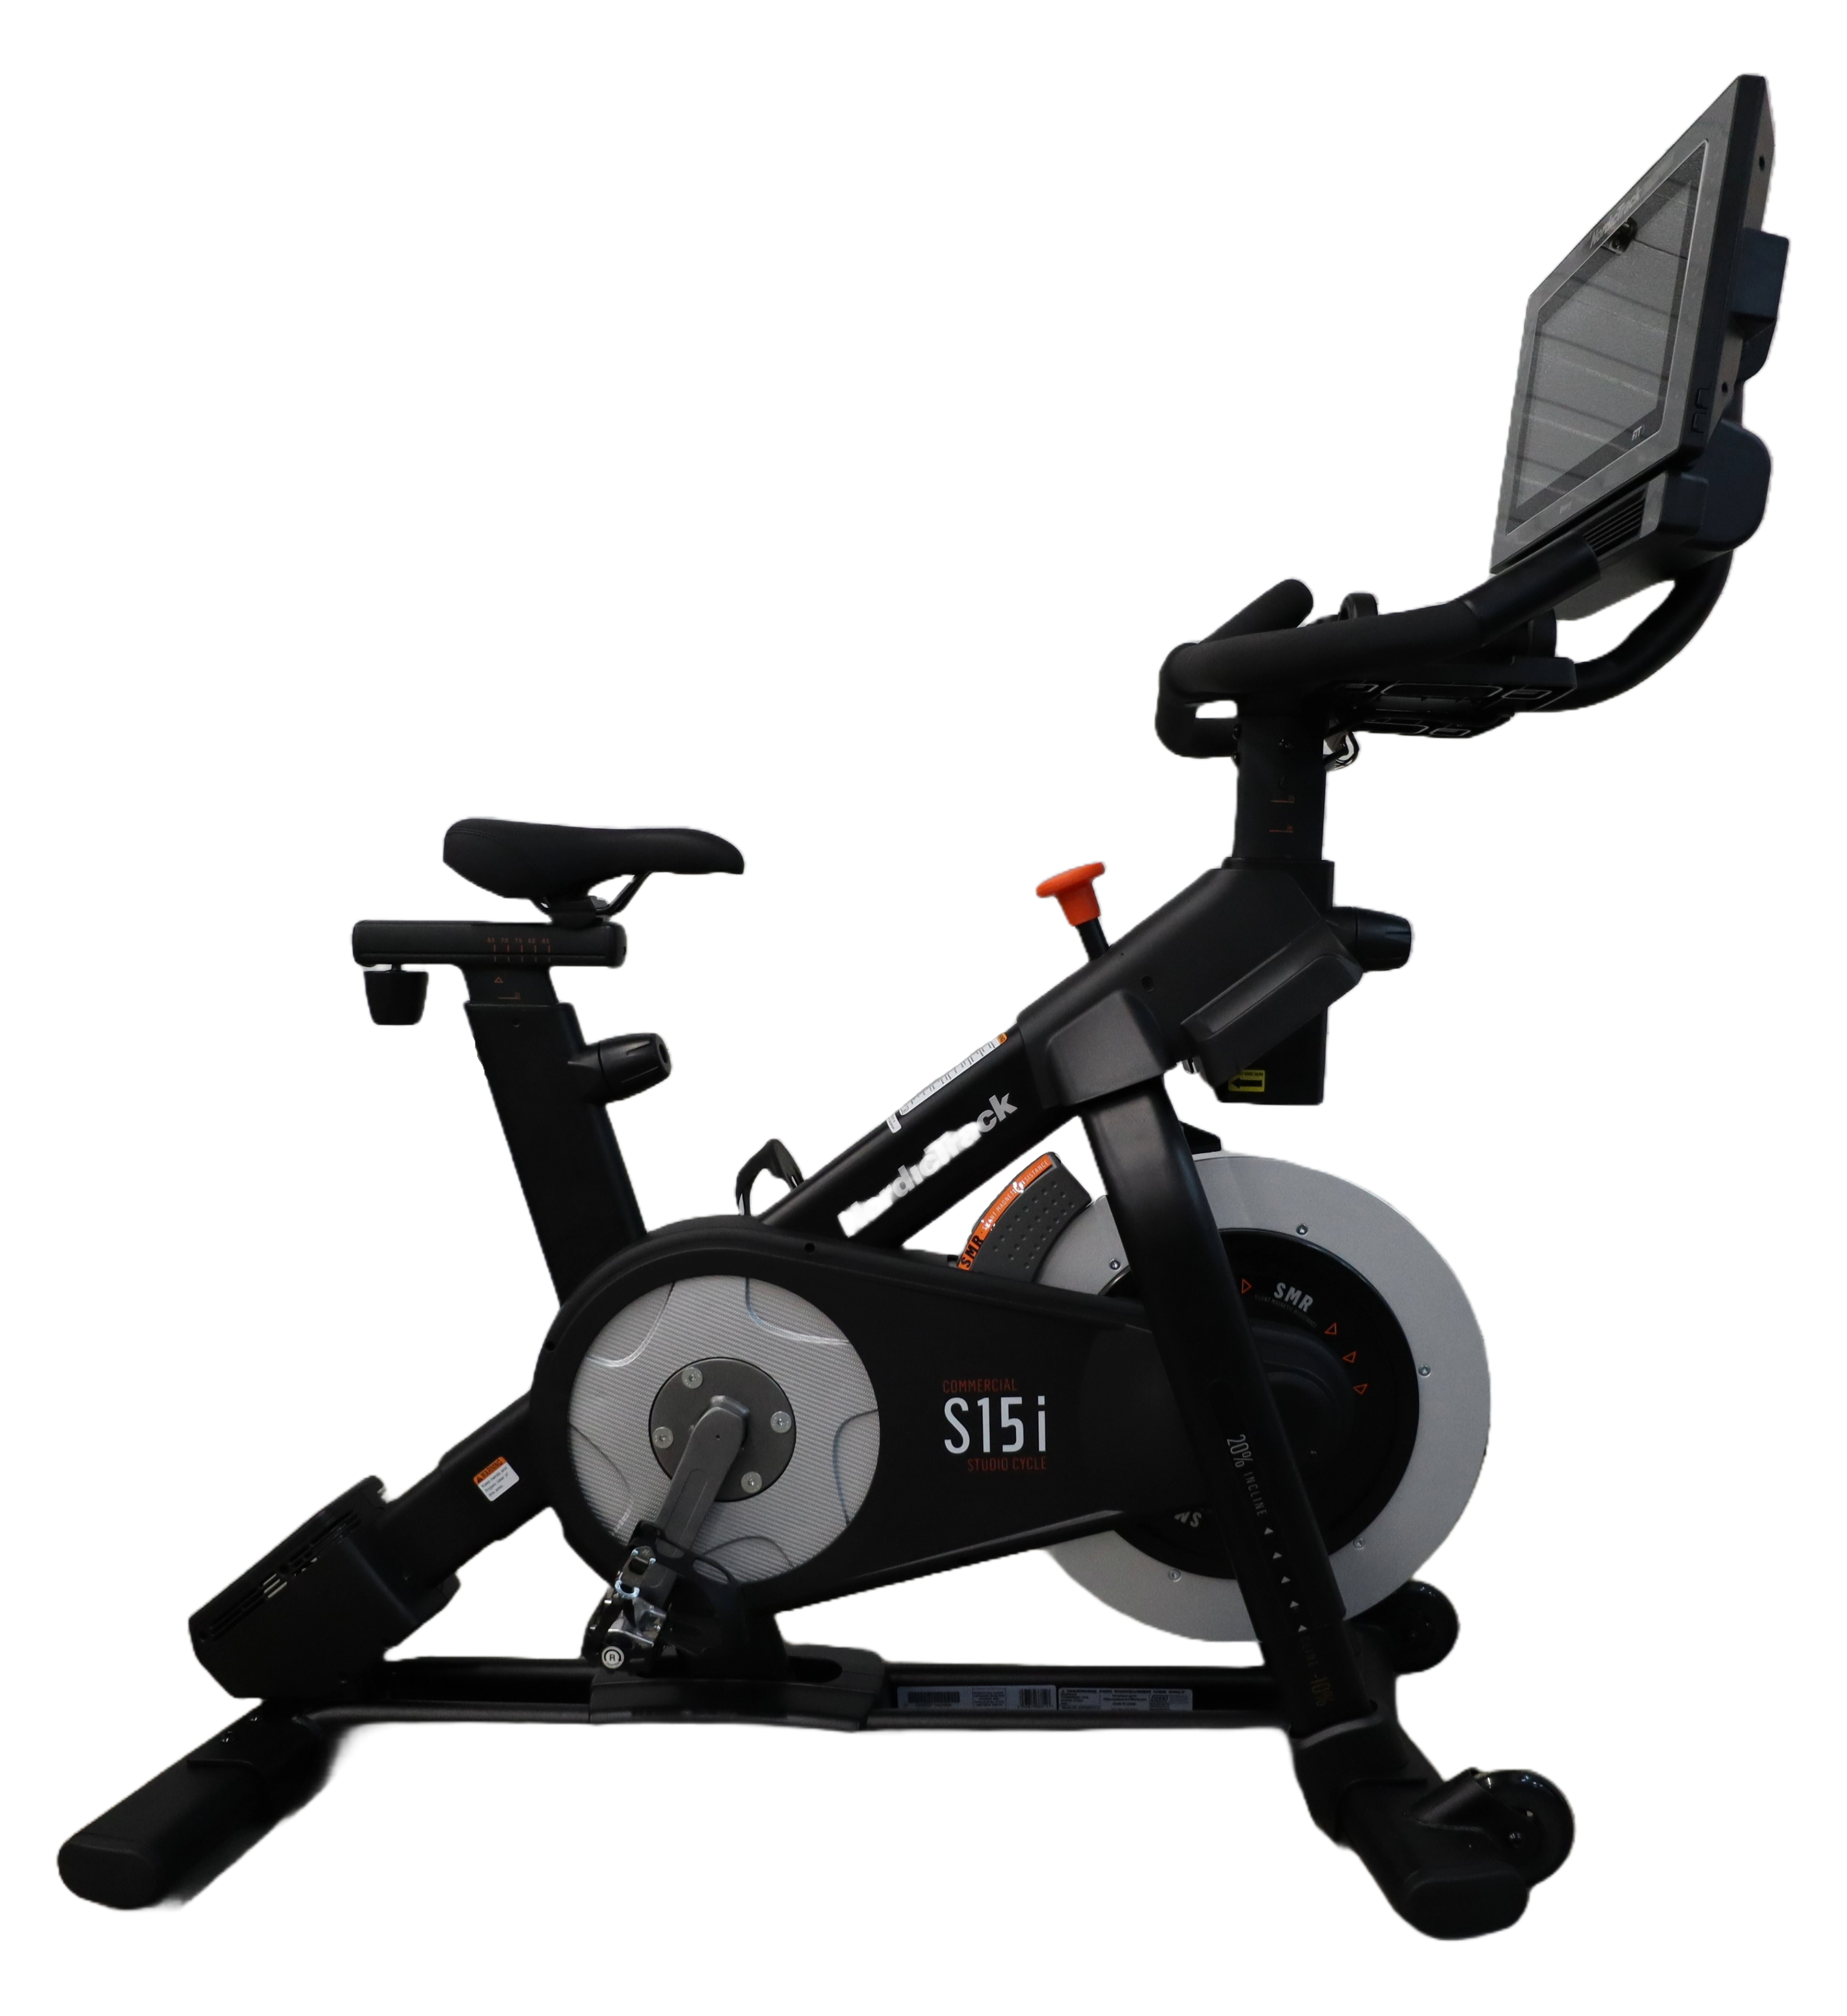 Used NordicTrack S15i Indoor Cycle NTEX05121.4 Upright Stationary Bike